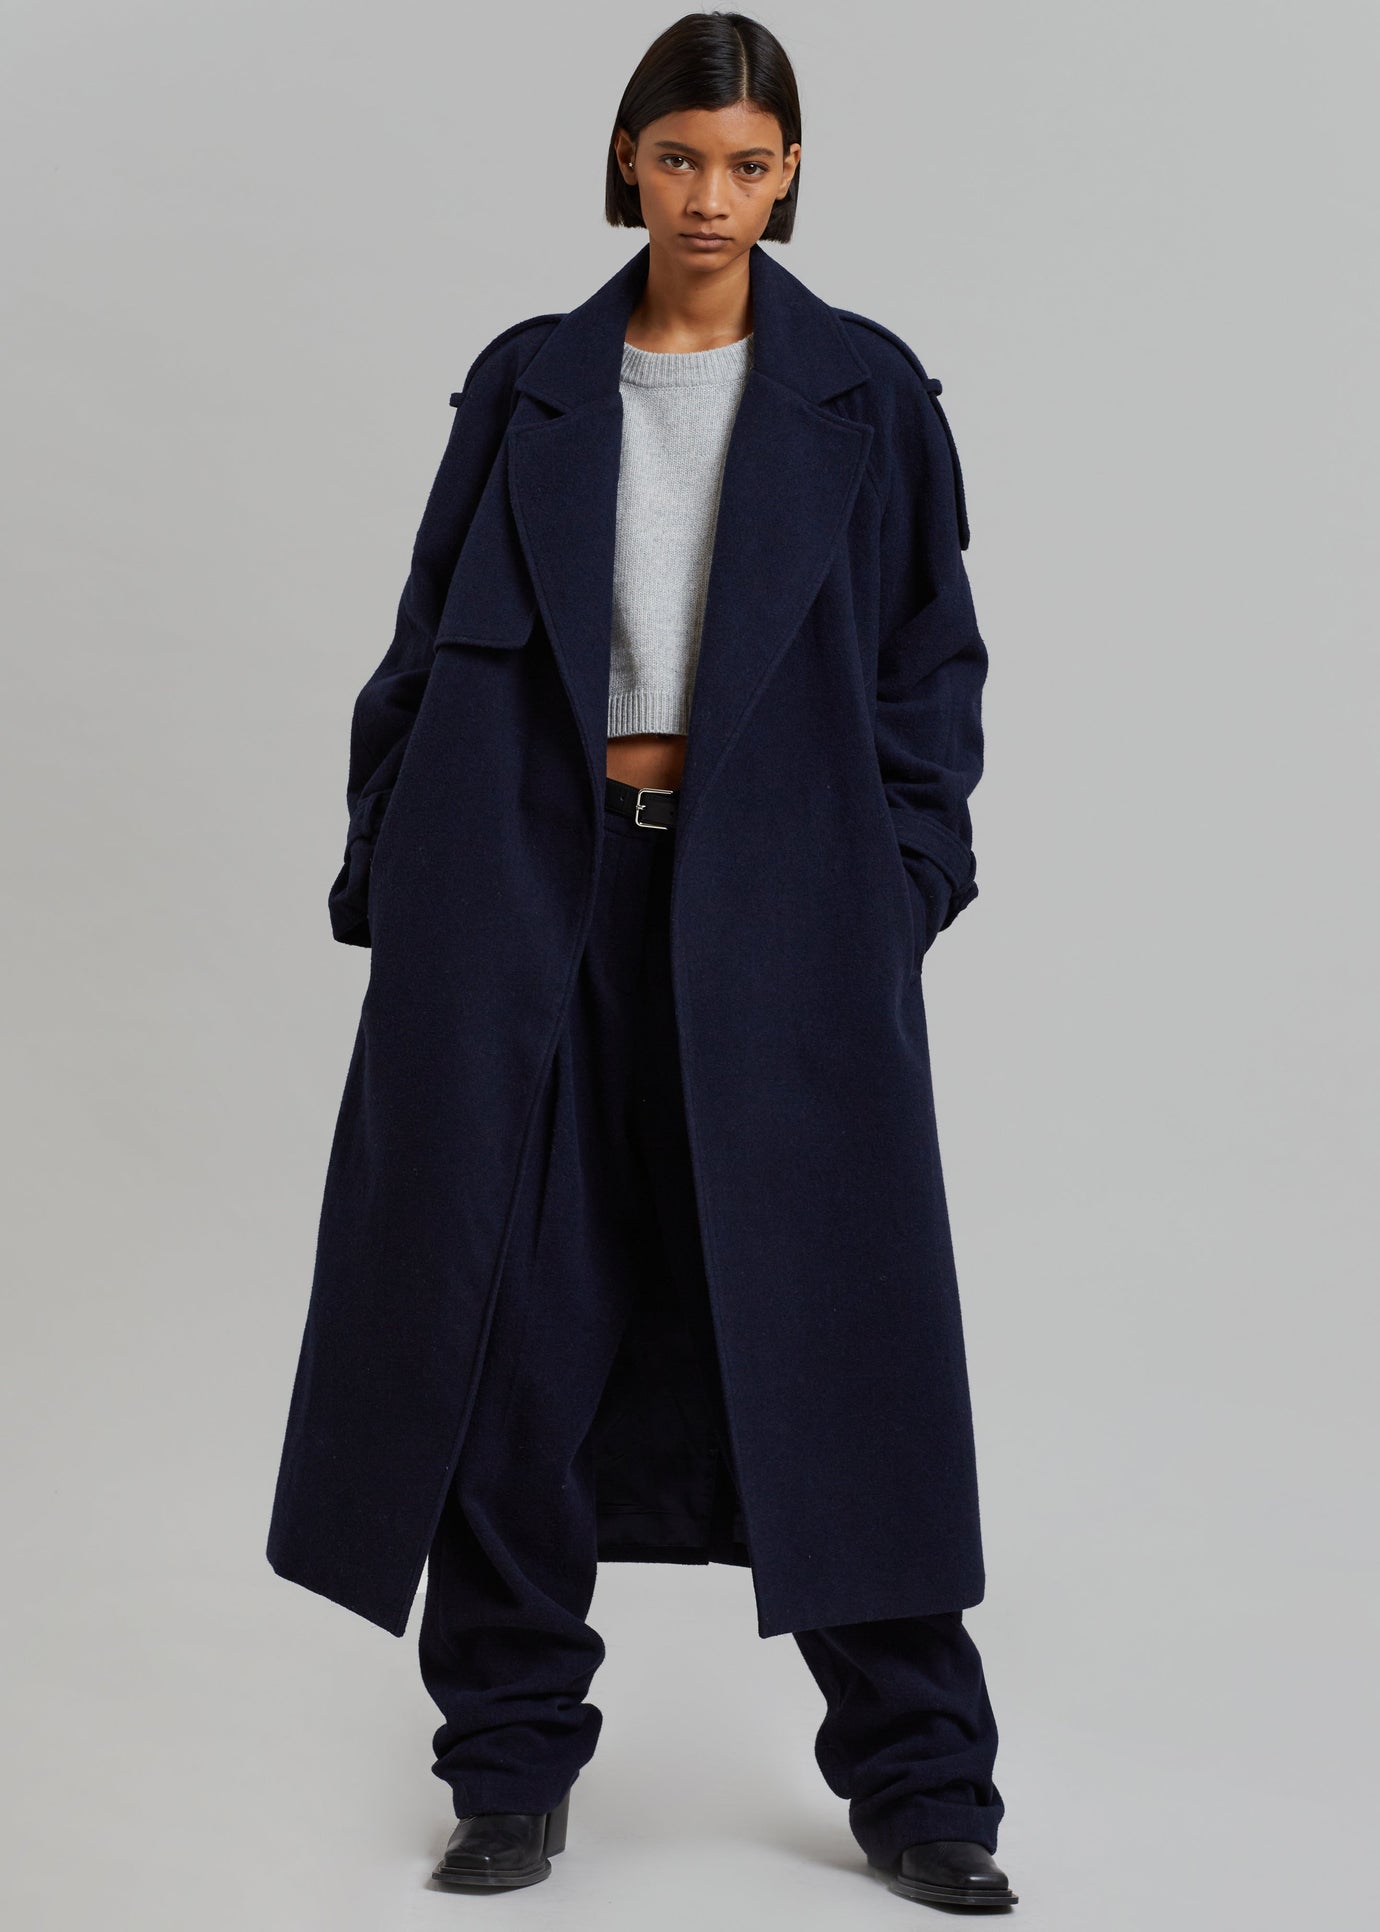 Suzanne Wool Trench Coat - Navy